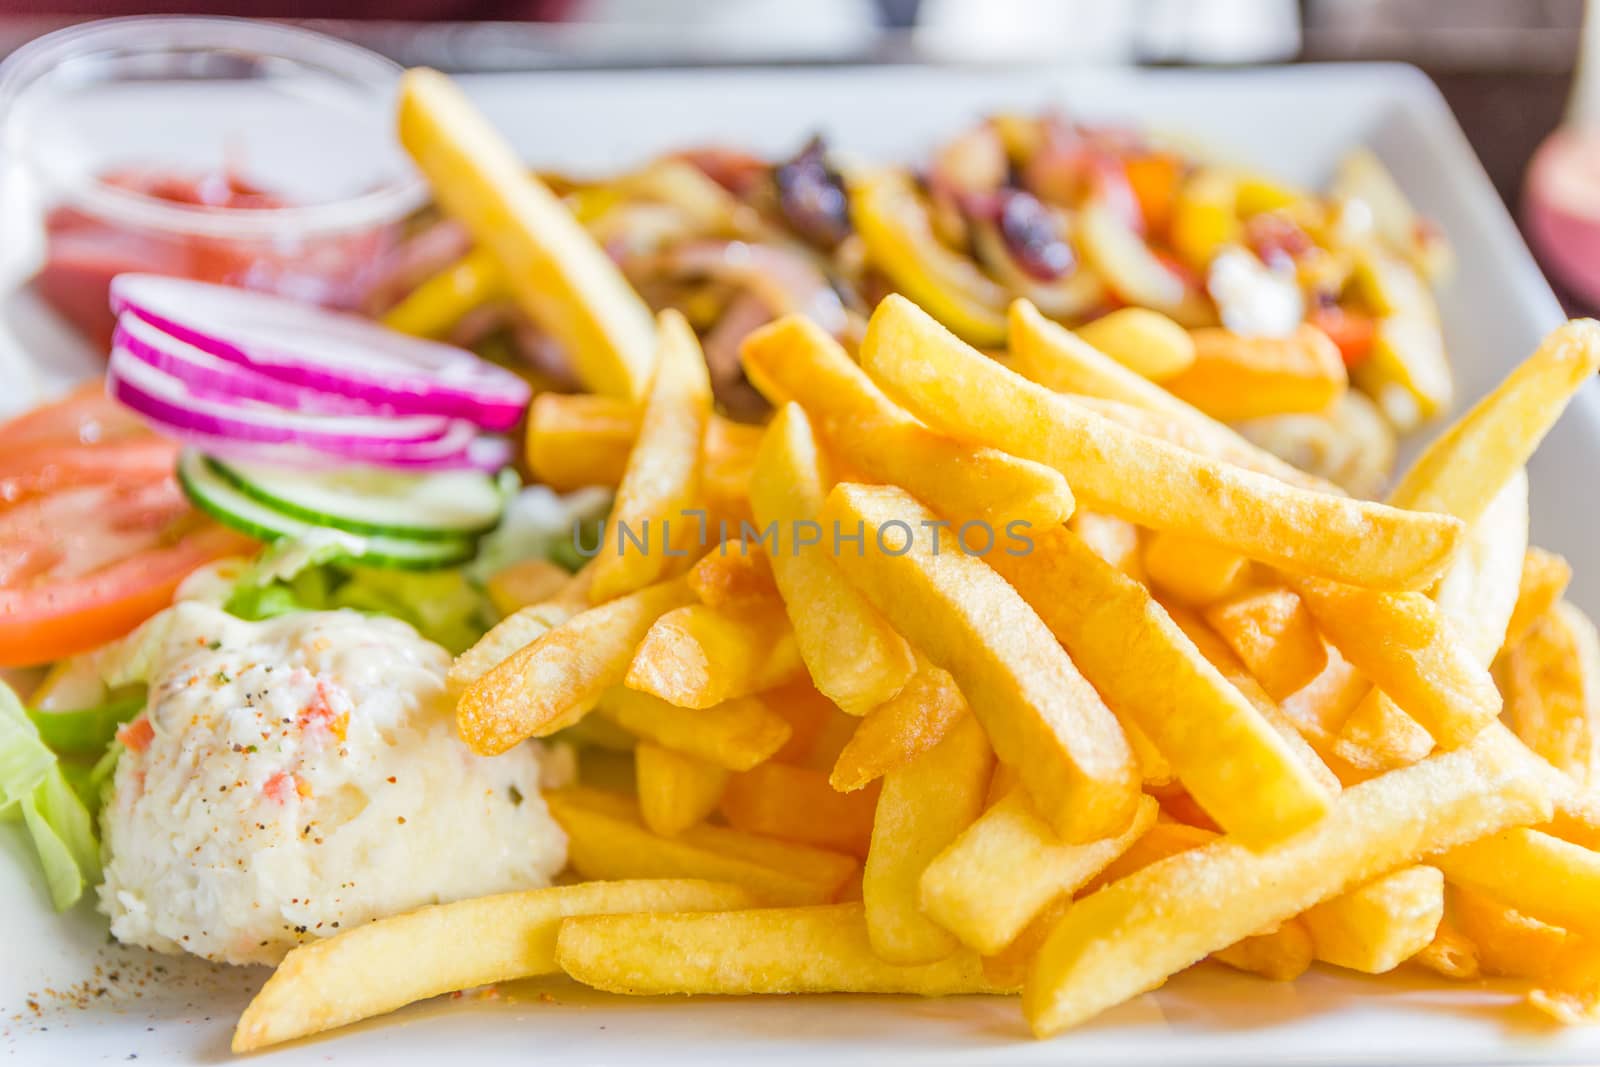 Plate full of French fries by gianliguori